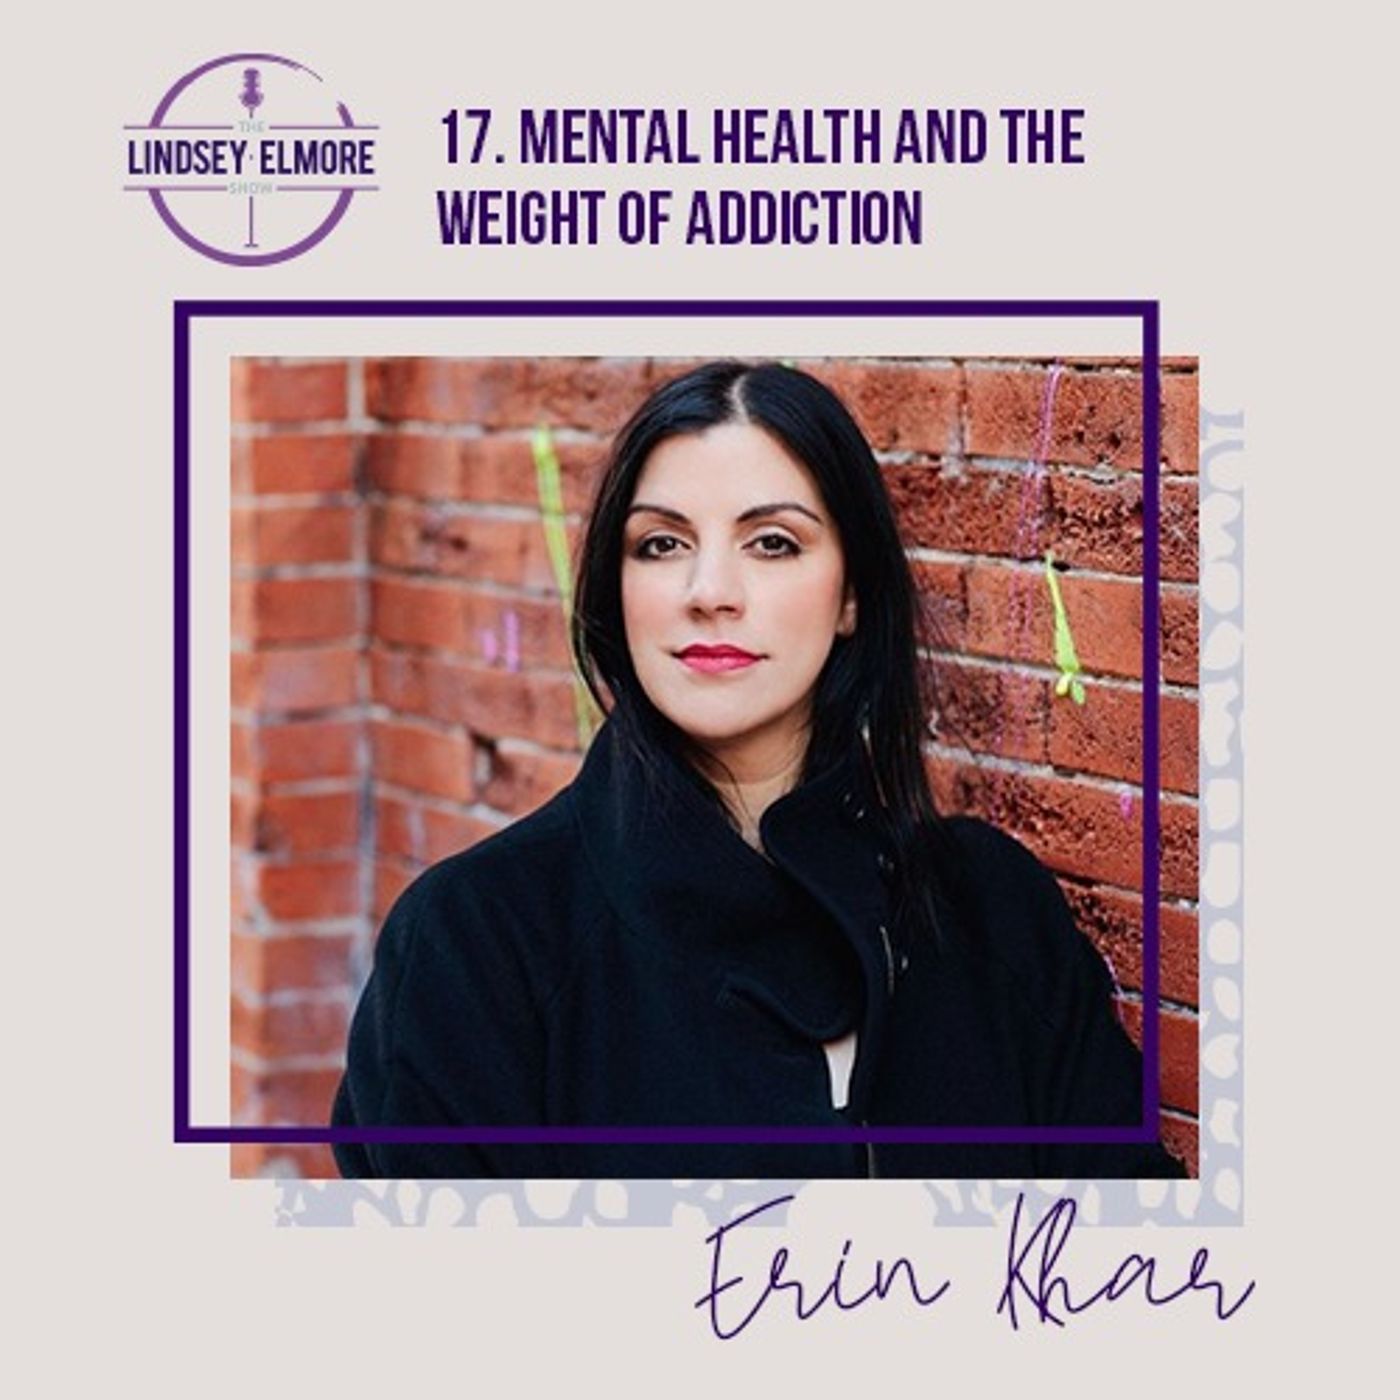 Mental health and the weight of addiction. An interview with Erin Khar.